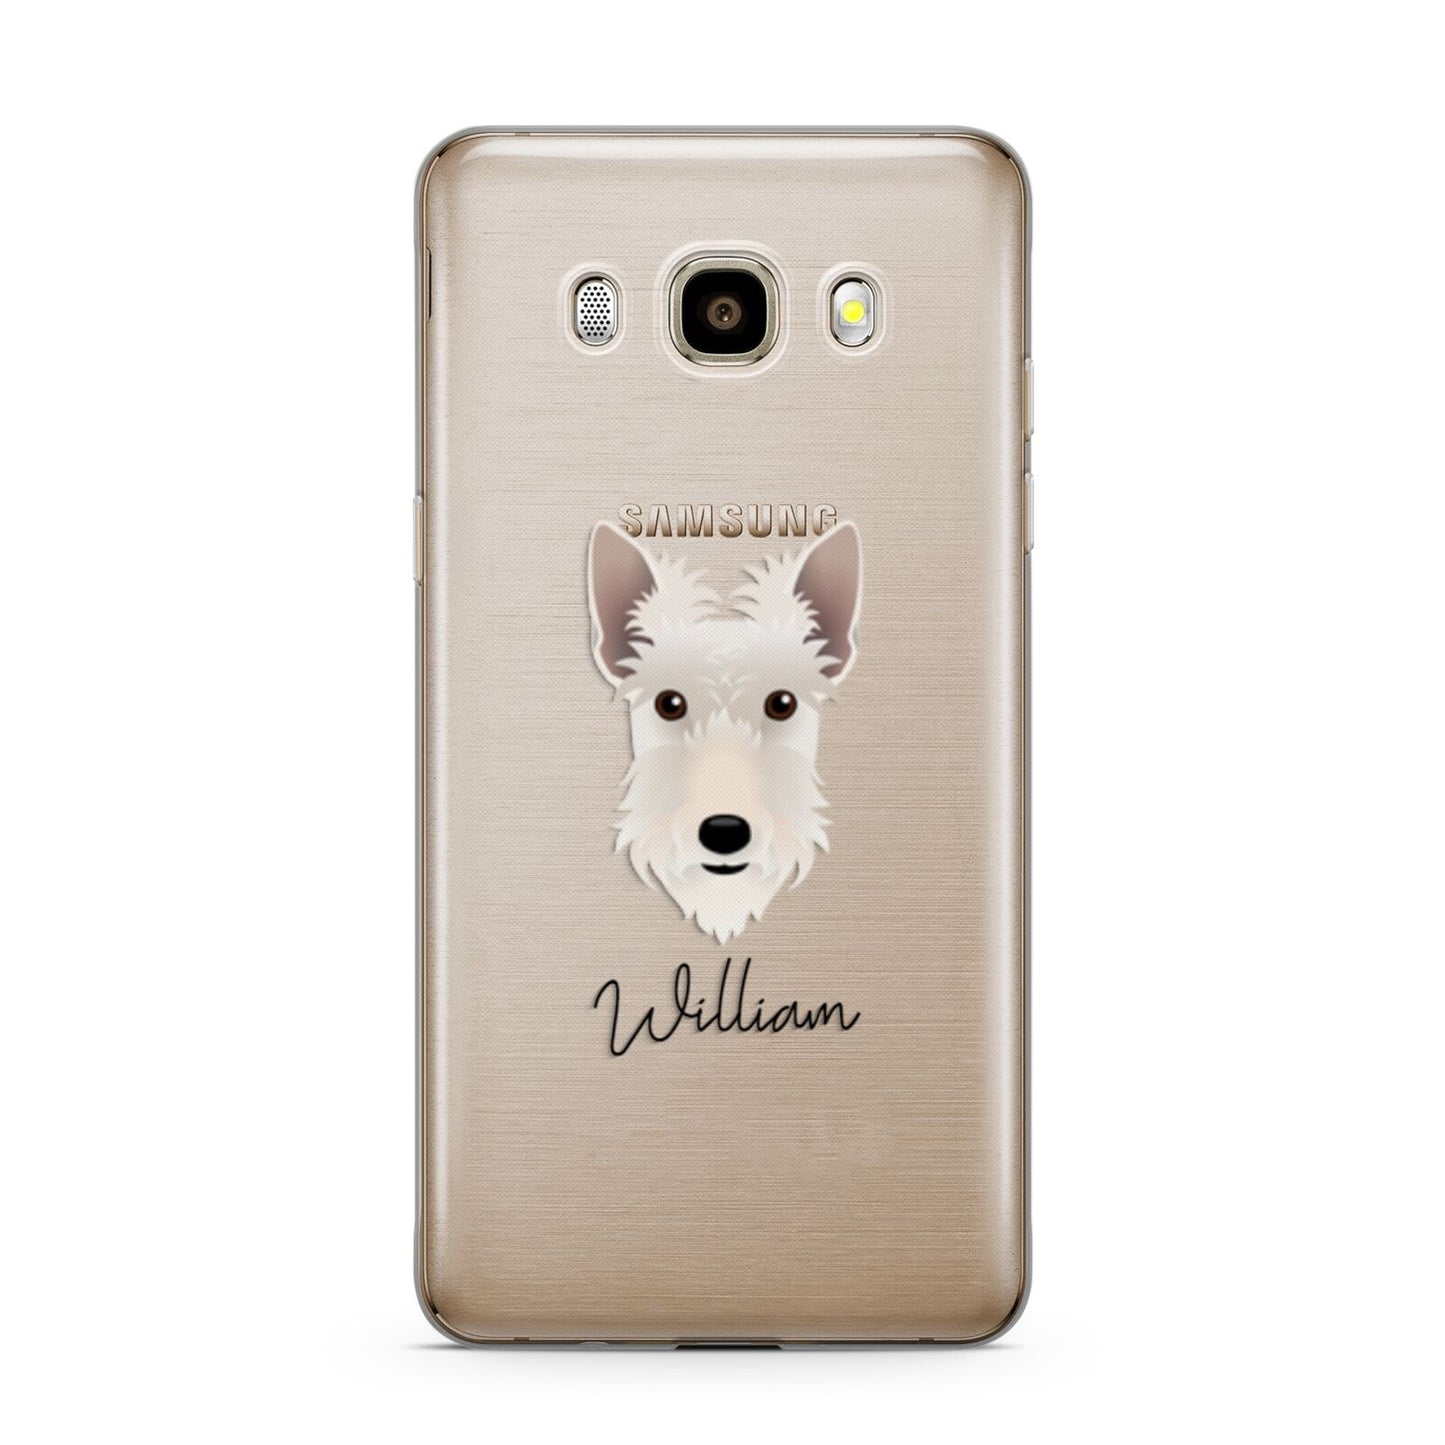 Scottish Terrier Personalised Samsung Galaxy J7 2016 Case on gold phone